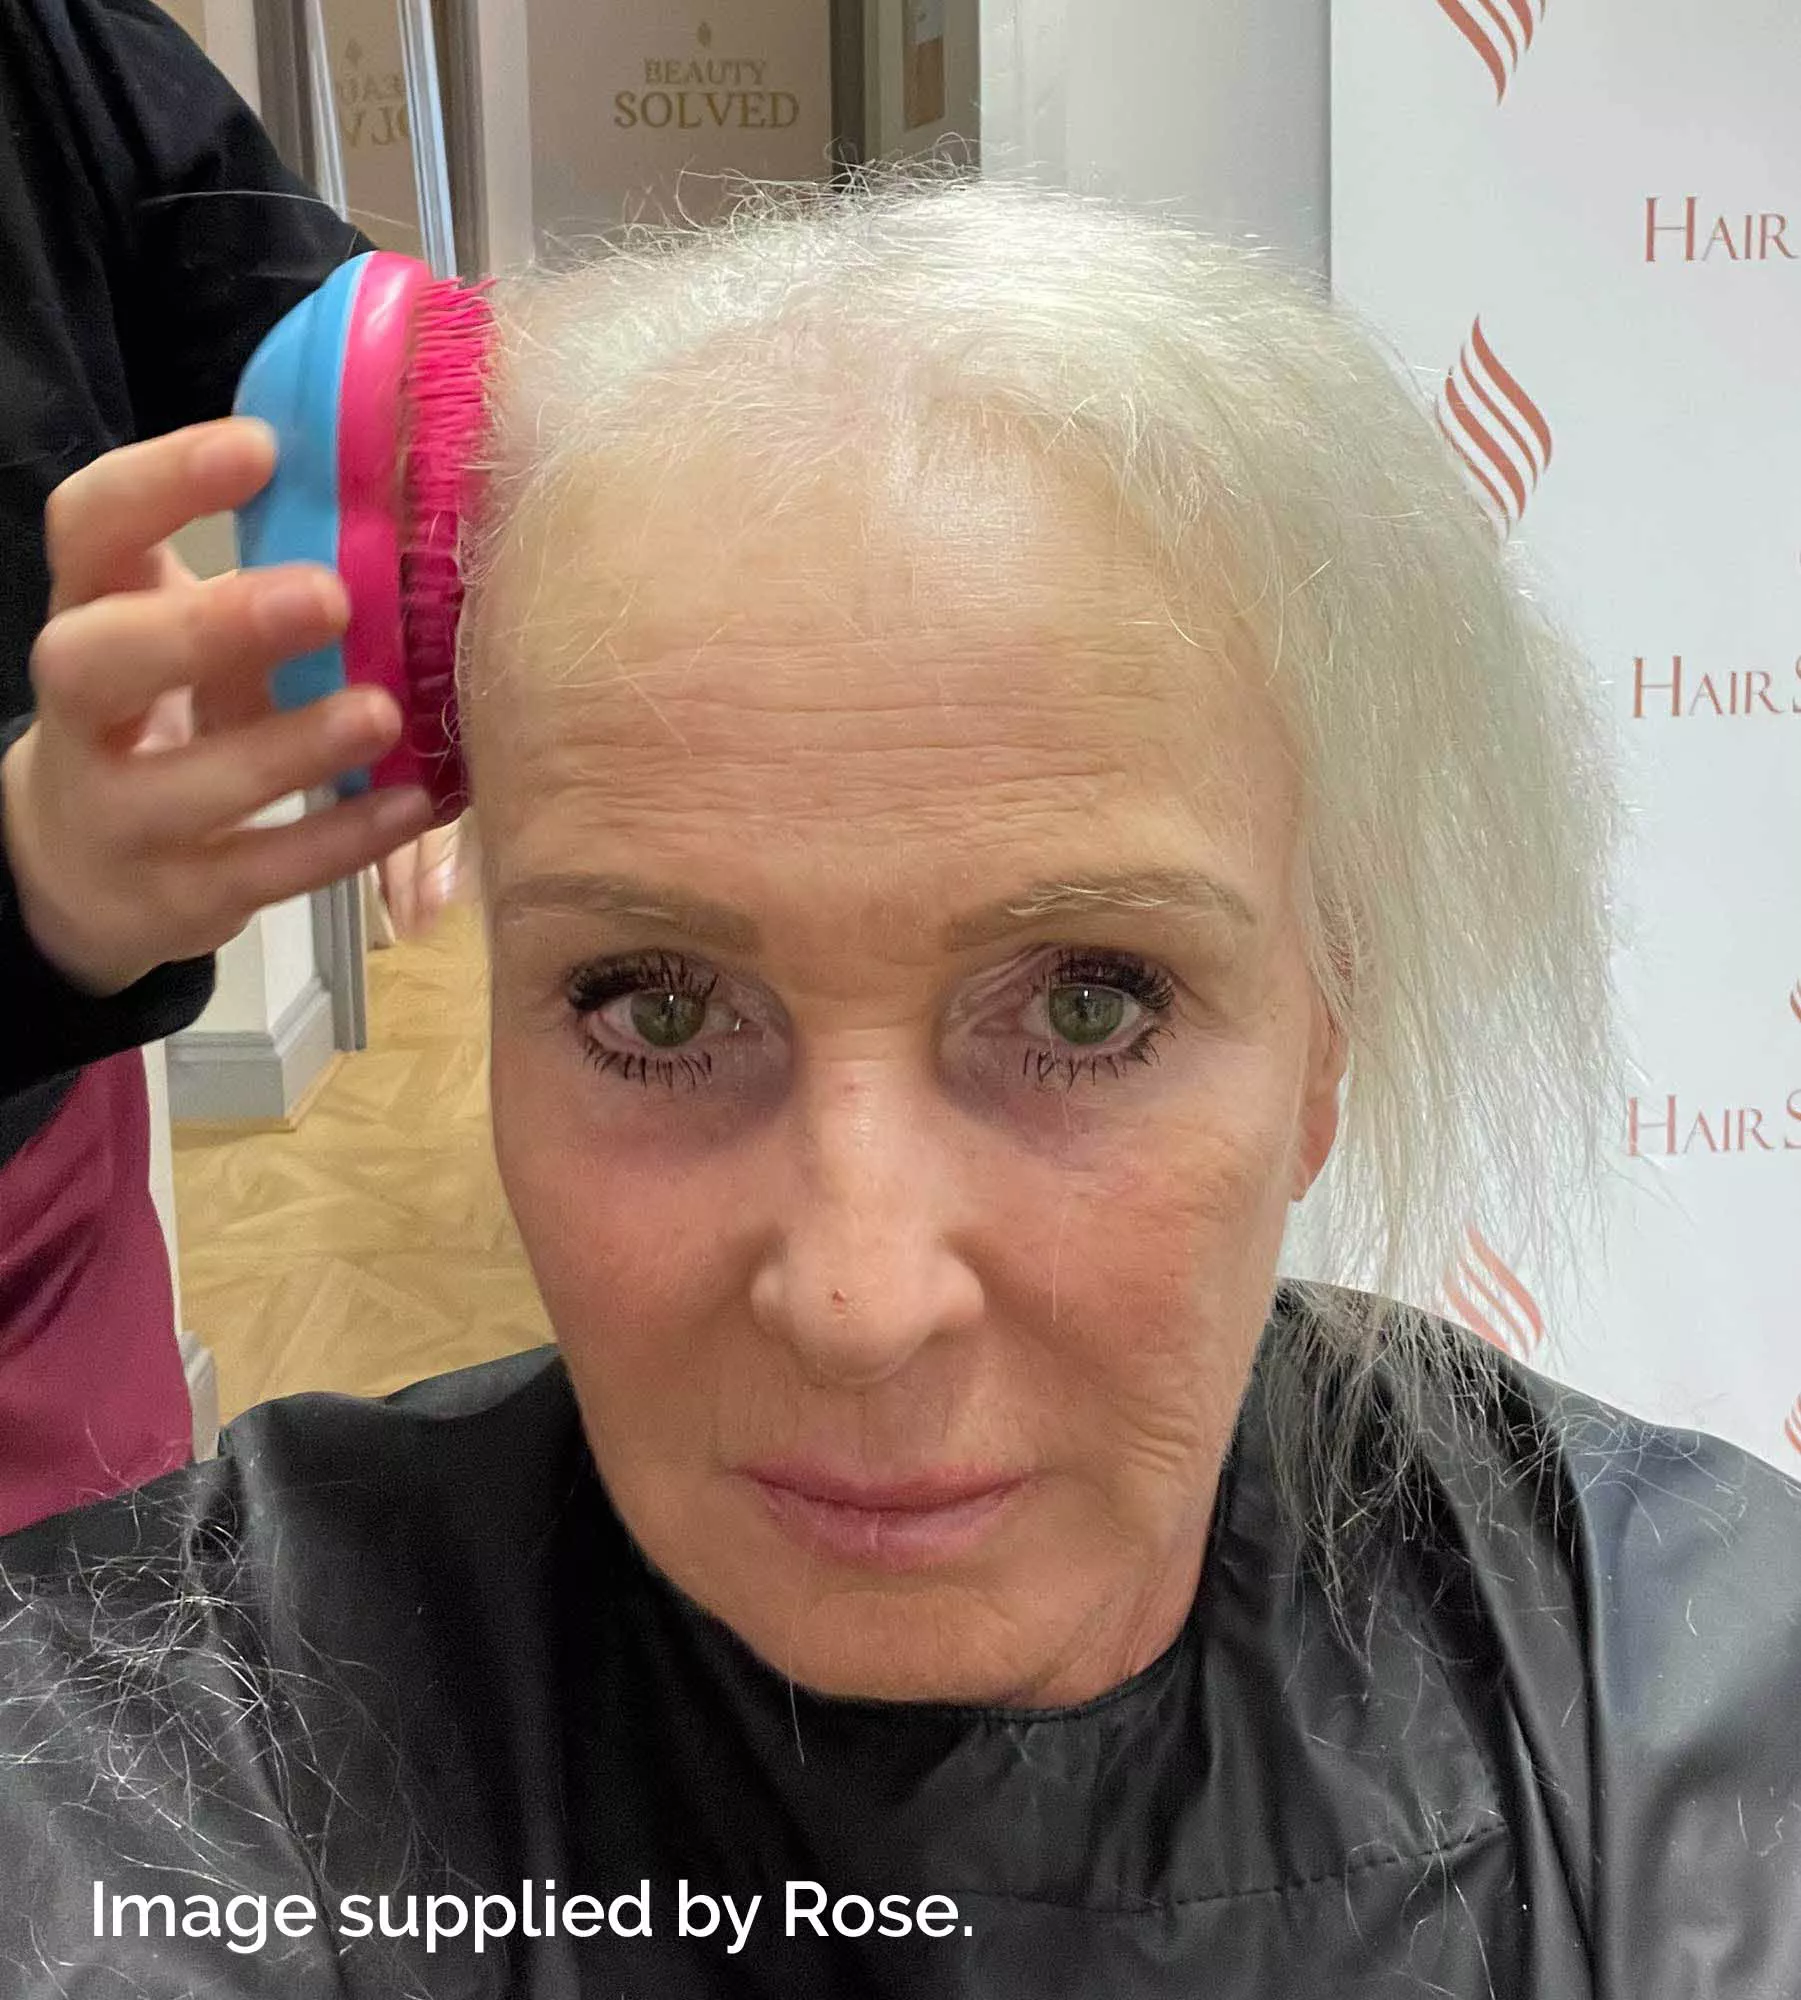 Rose at Hair Solved in Bristol before her system was fitted.